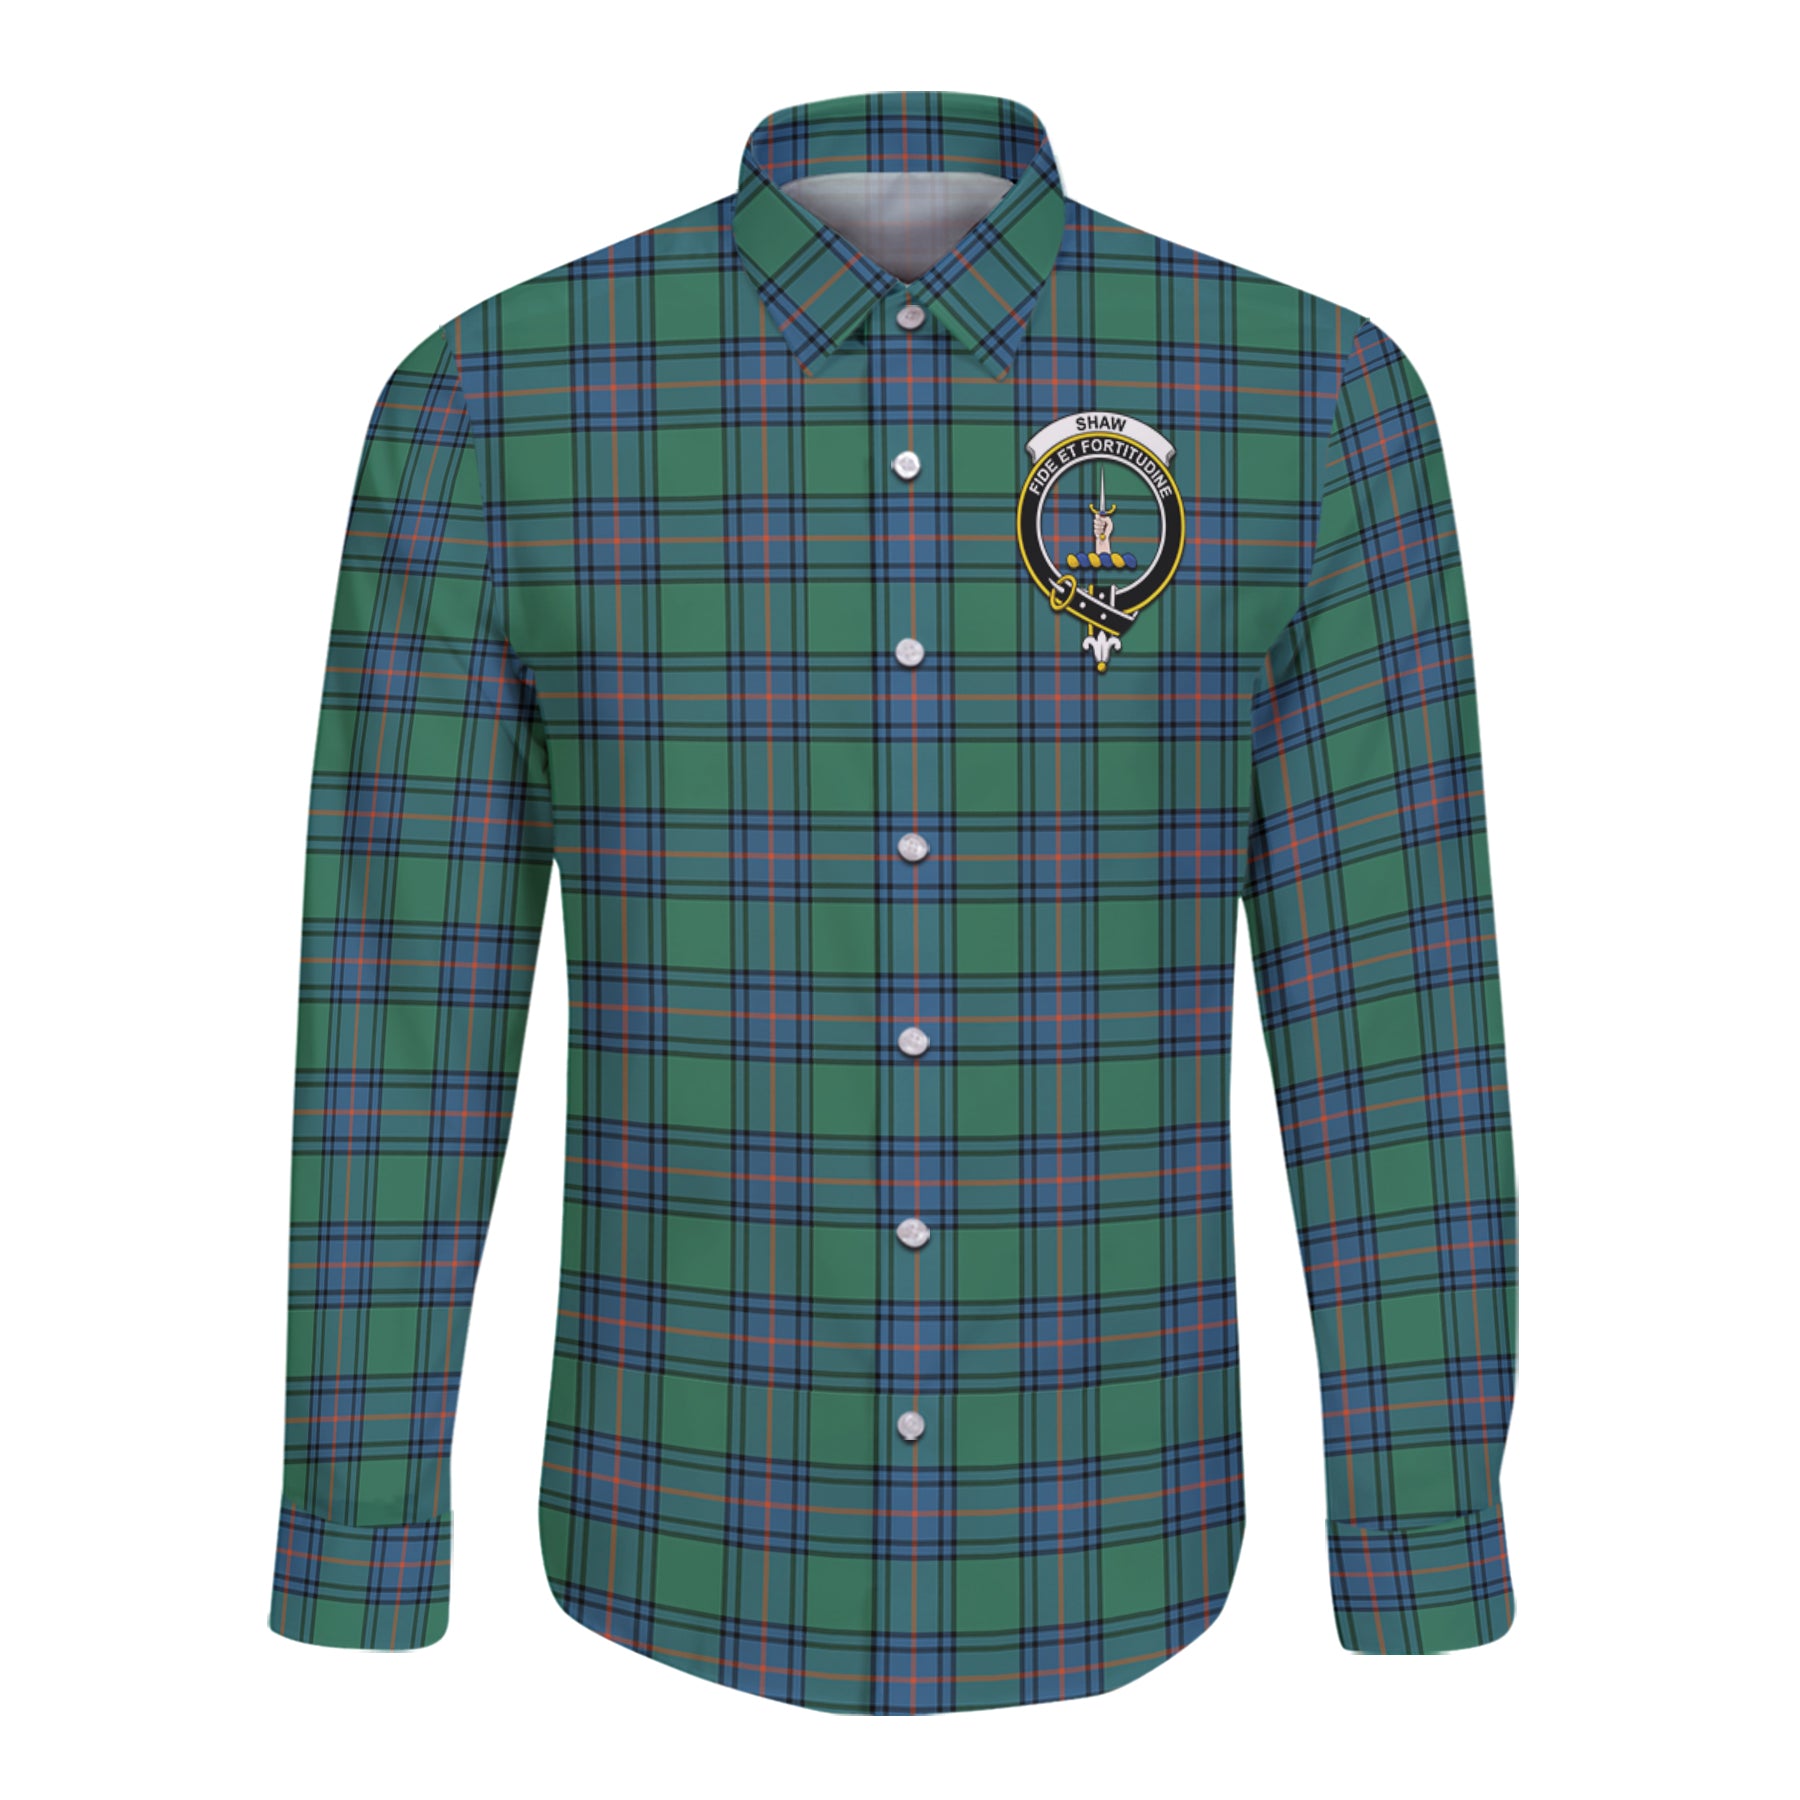 Shaw Ancient Tartan Long Sleeve Button Up Shirt with Scottish Family Crest K23